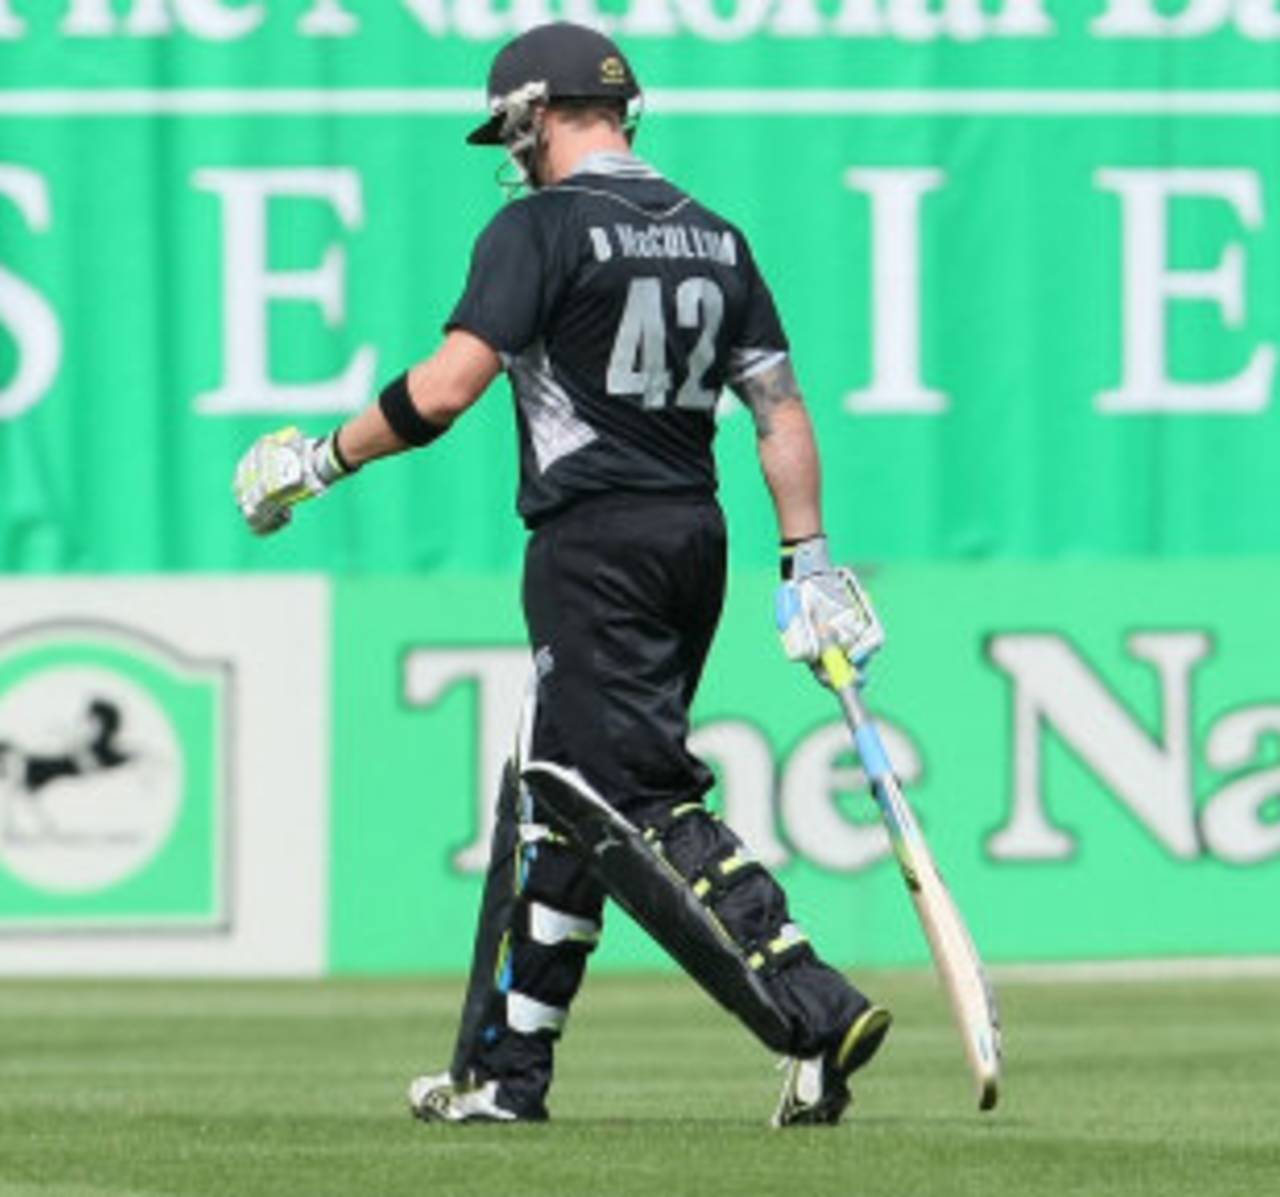 Brendon McCullum averages only 25.46 in his last 50 ODIs against the top eight teams&nbsp;&nbsp;&bull;&nbsp;&nbsp;Getty Images